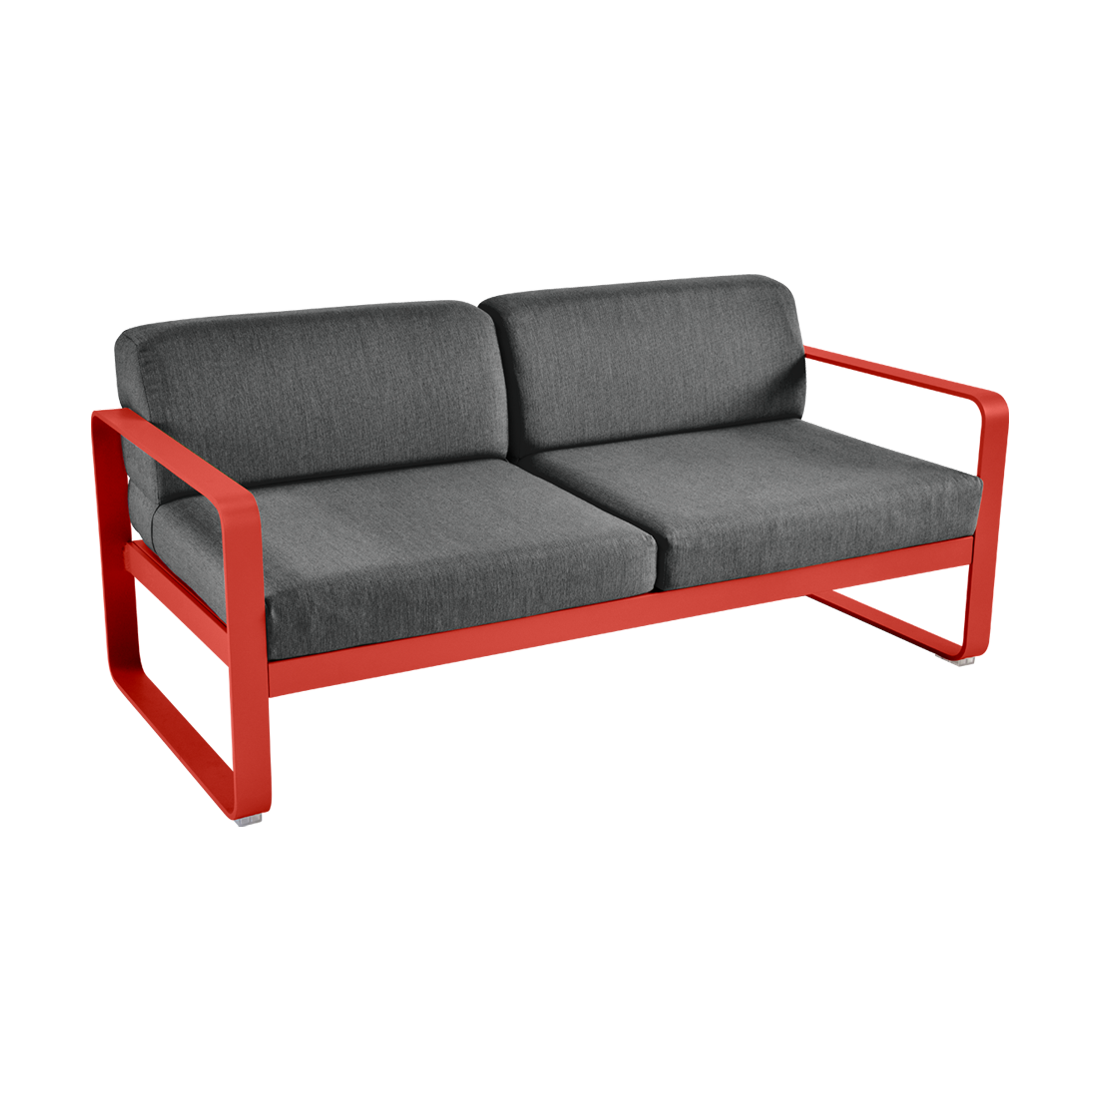 FERMOB Bellevie 2-Seater Outdoor Sofa with Graphite Cushions